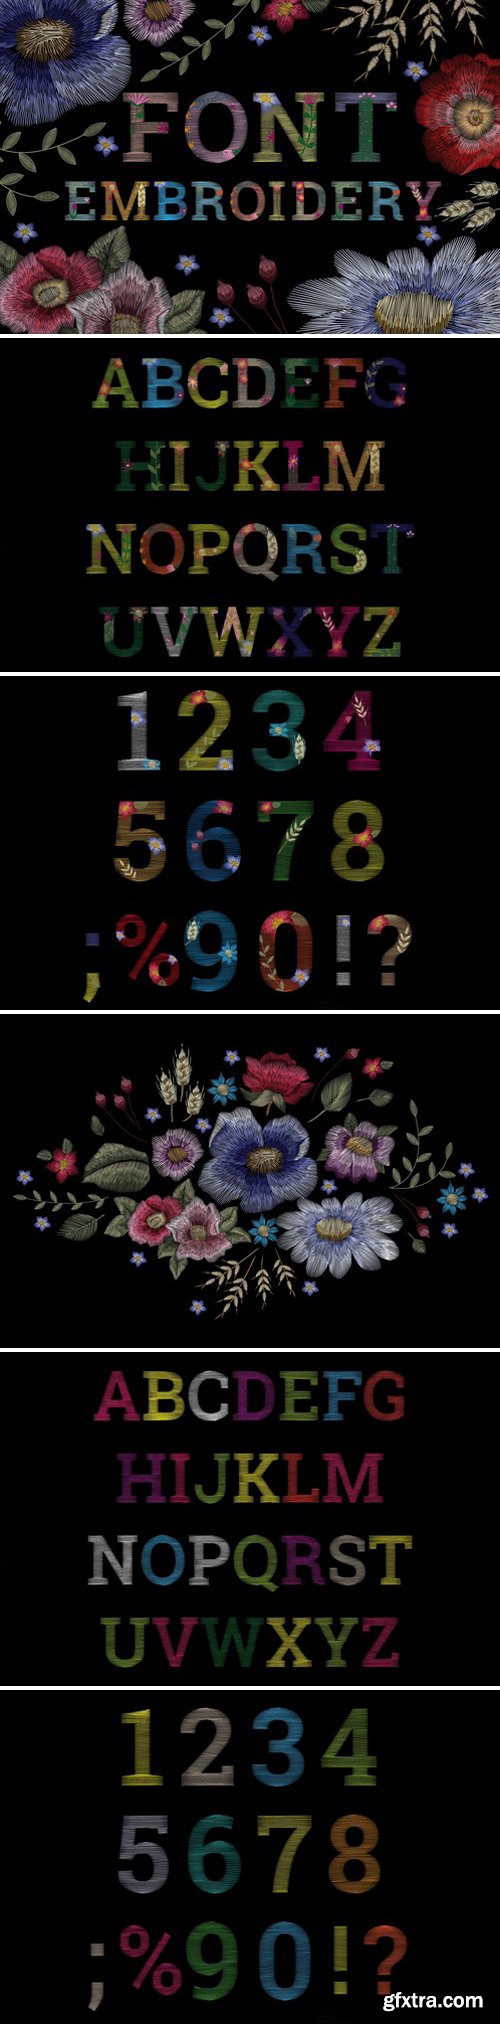 CM - Font flower embroidery 1587910